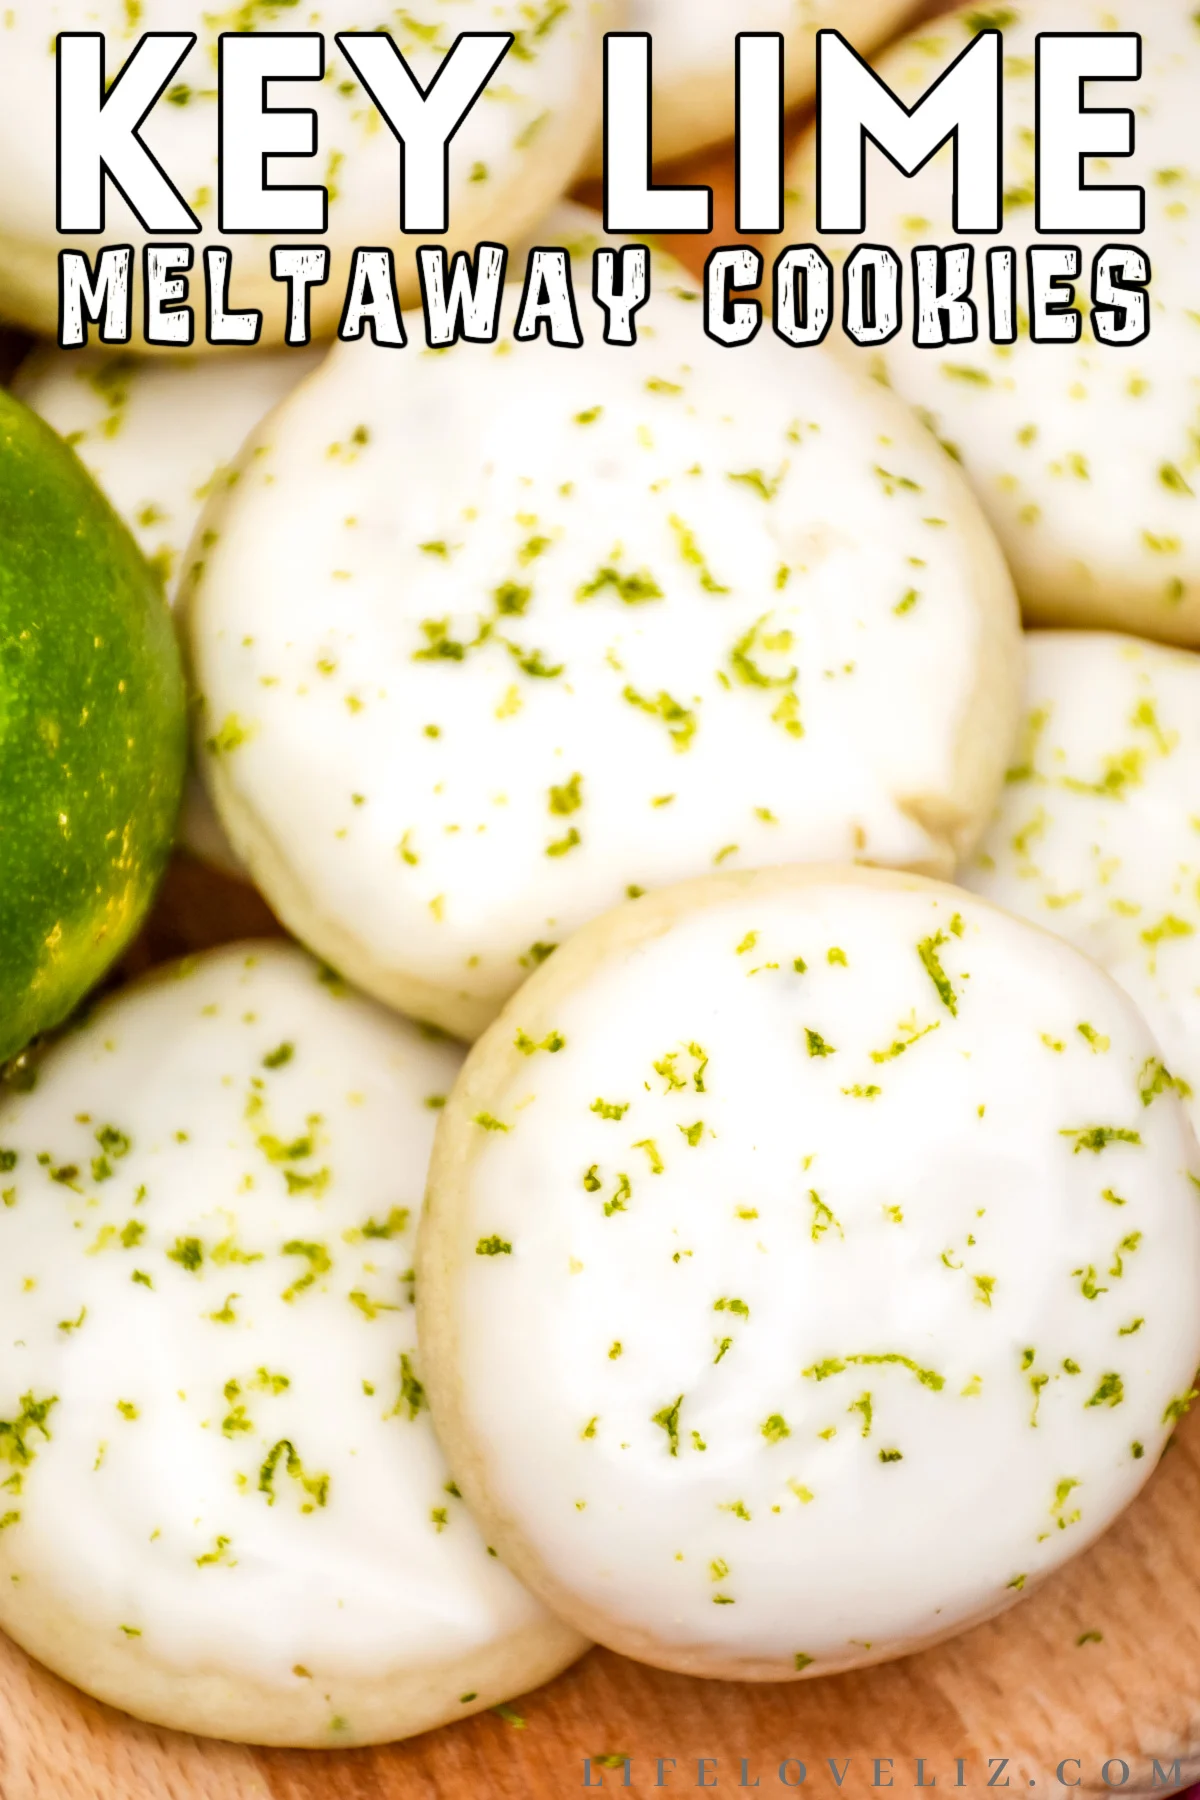 Soft, buttery cookies loaded with key lime flavor - perfect for summer! These key lime meltaway cookies are easy to make and so delicious.